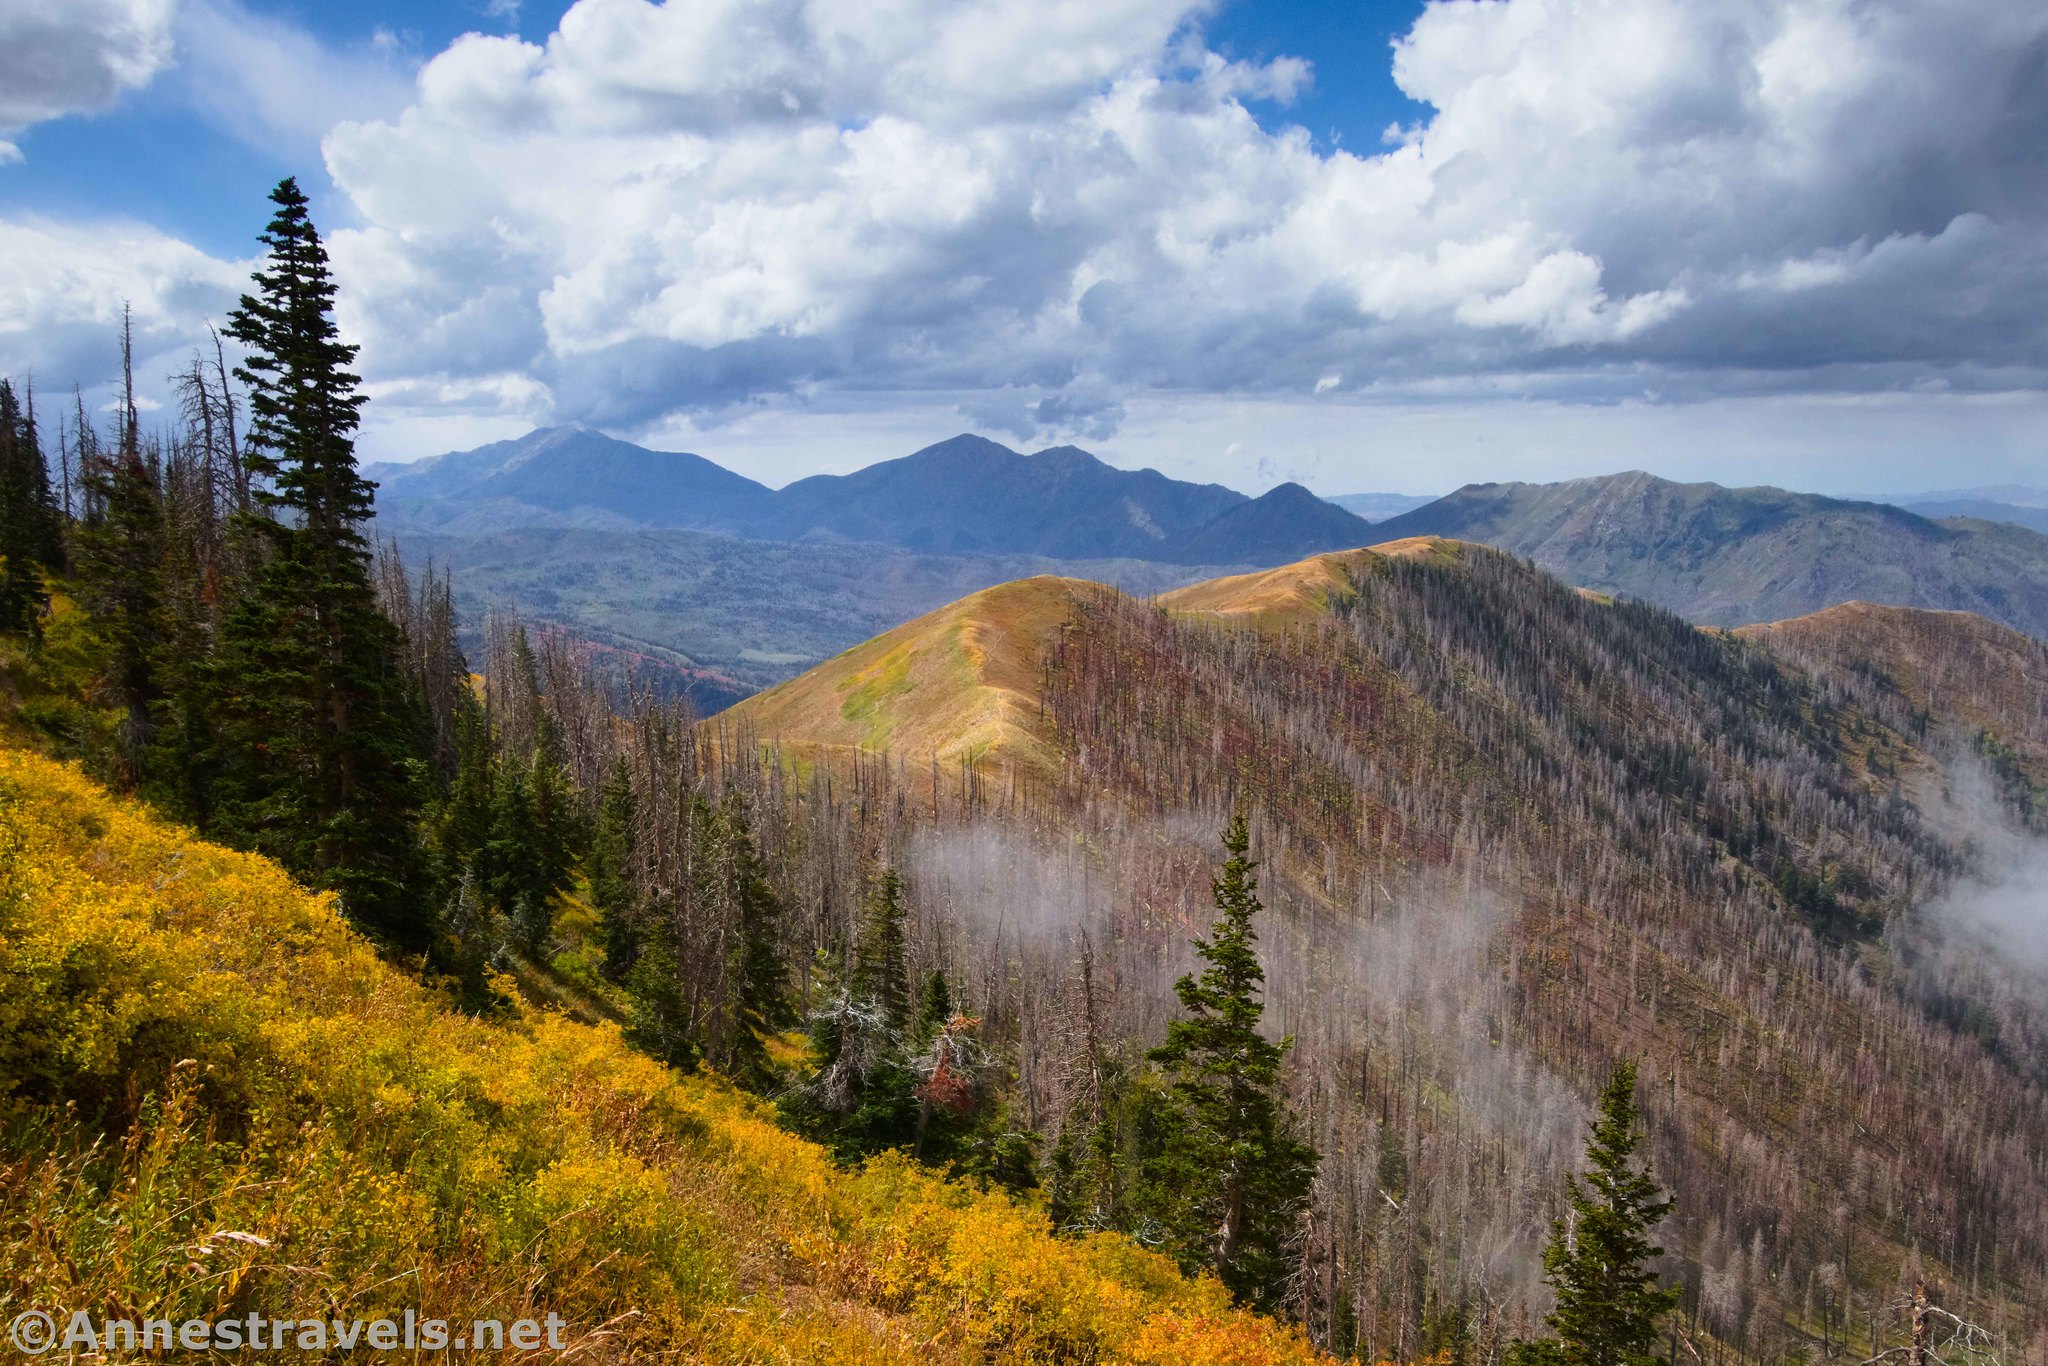 Views along the Loafer Mountain Trail en route to Santaquin Peak, Uinta-Wasatch-Cache National Forest, Utah